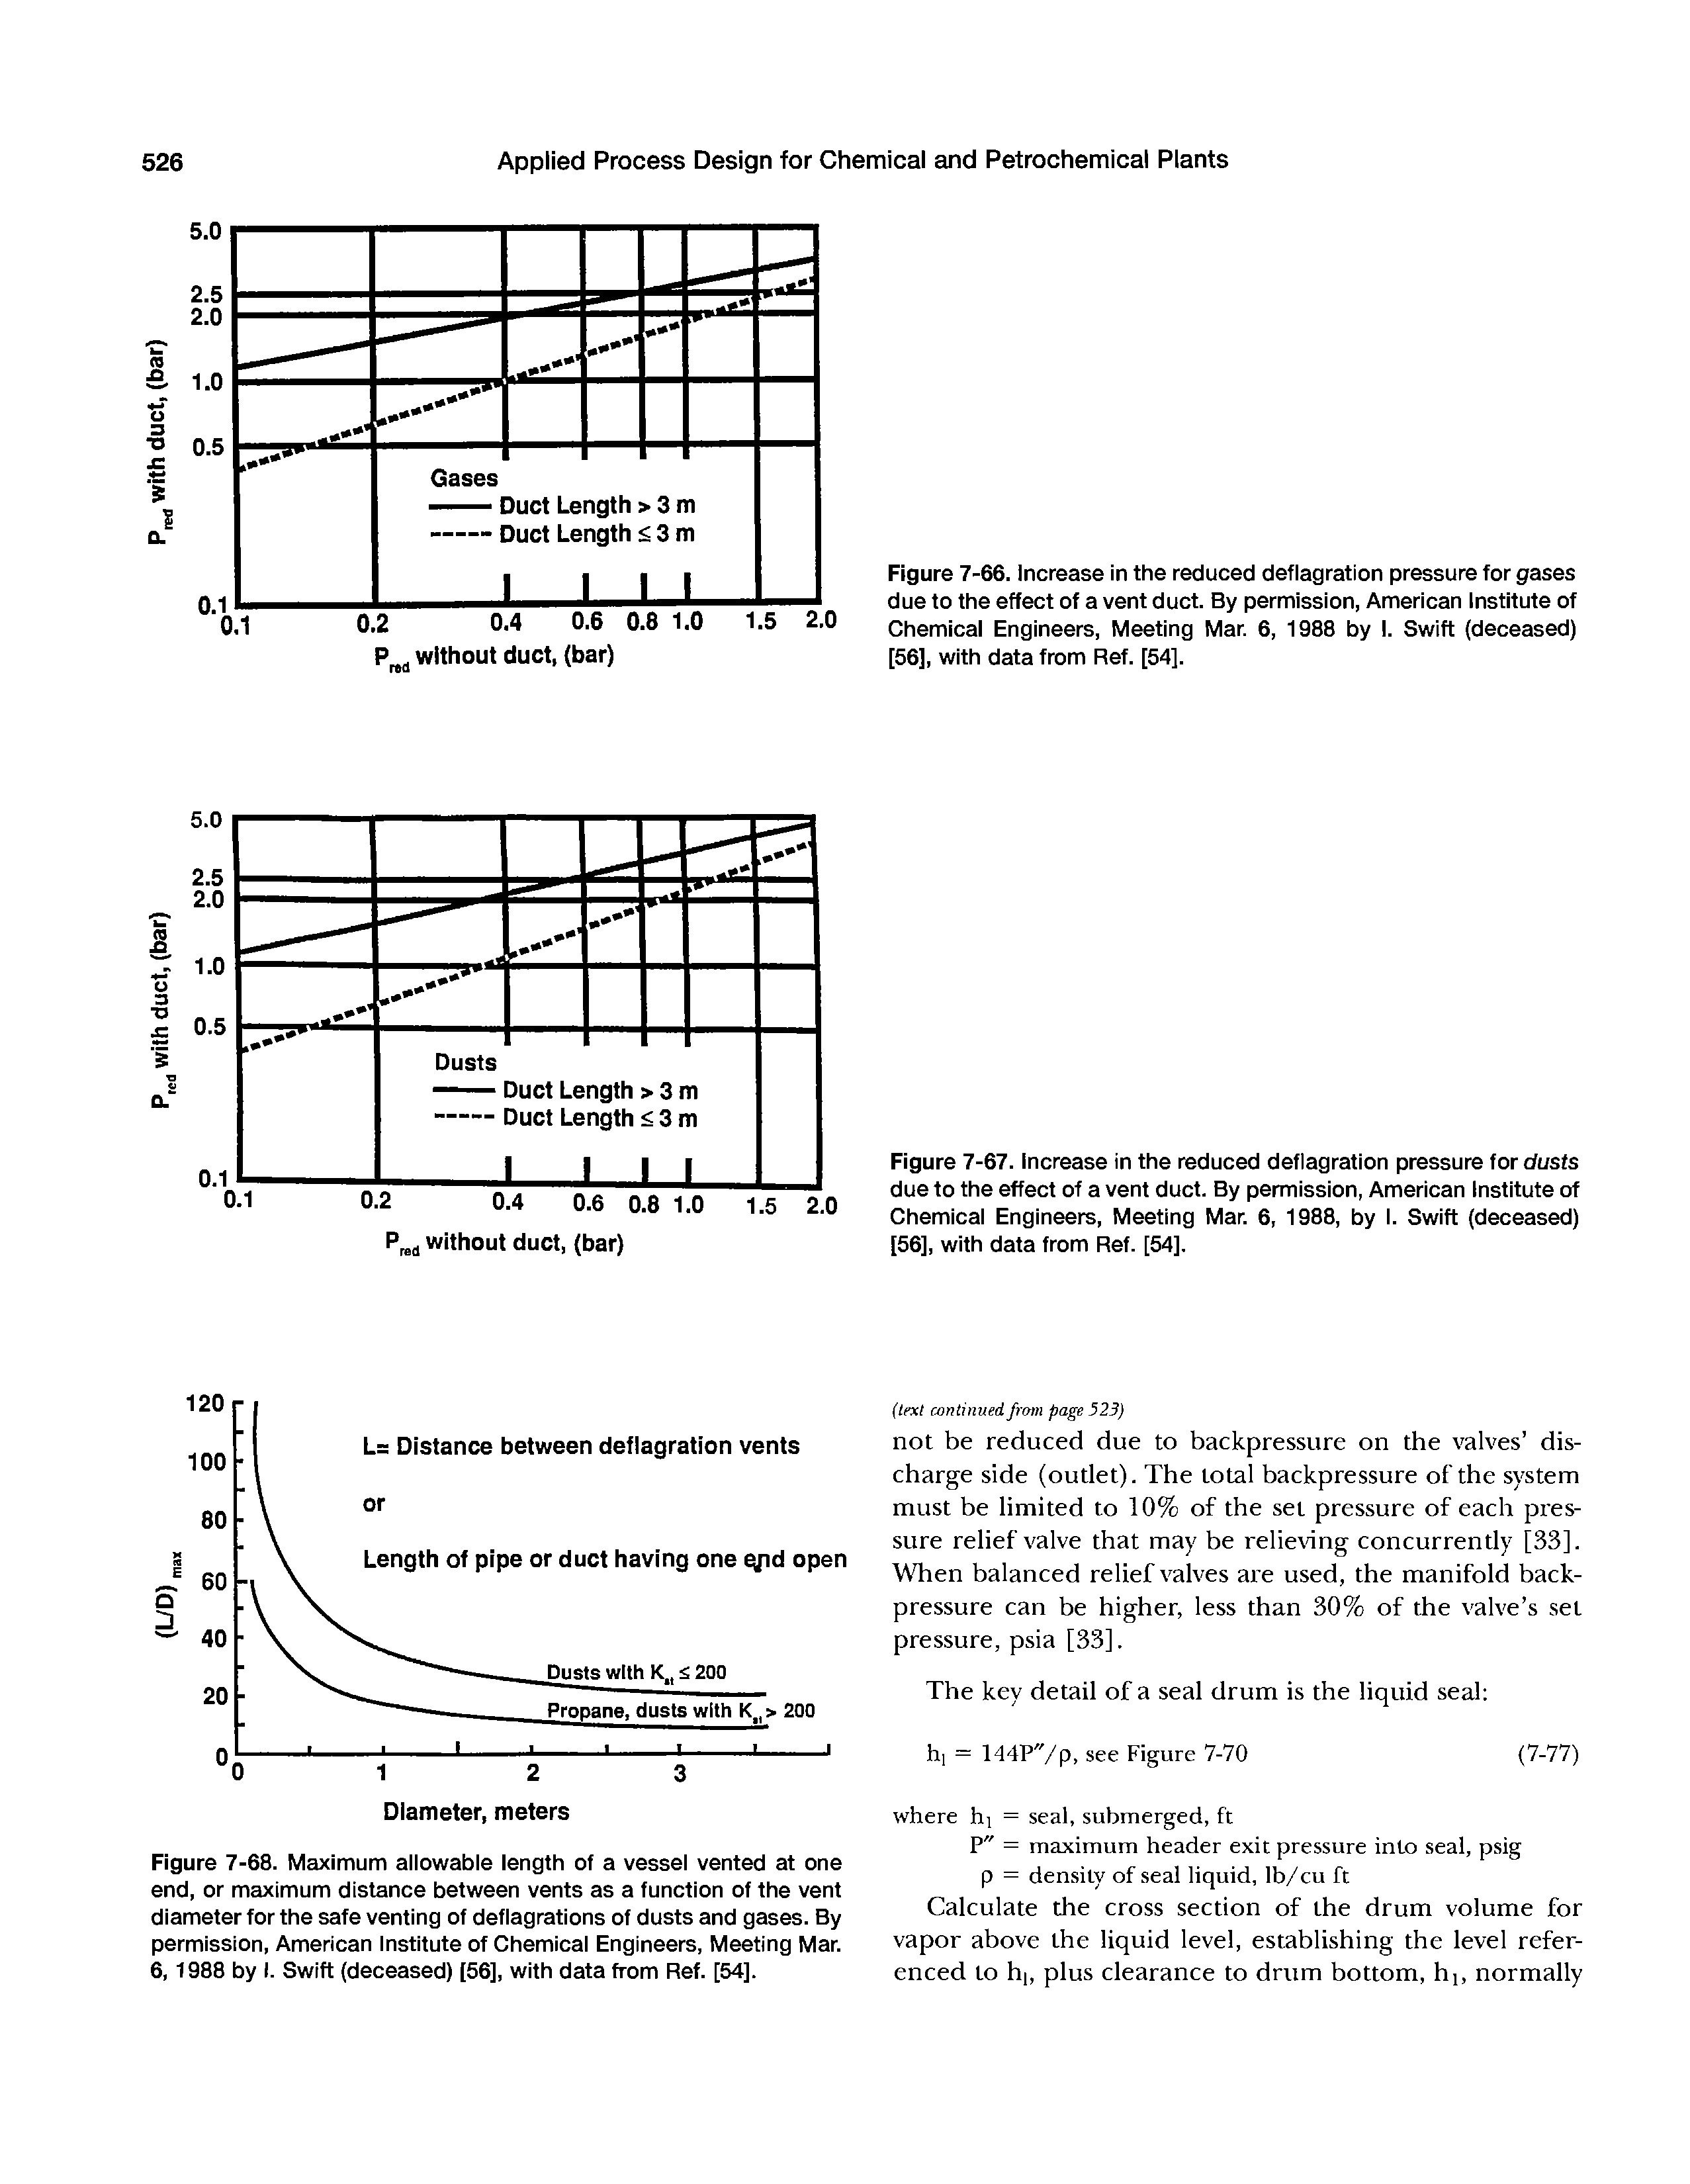 Figure 7-68. Maximum allowable length of a vessel vented at one end, or maximum distance between vents as a function of the vent diameter for the safe venting of deflagrations of dusts and gases. By permission, American Institute of Chemical Engineers, Meeting Mar. 6, 1988 by I. Swift (deceased) [56], with data from Ref. [54].